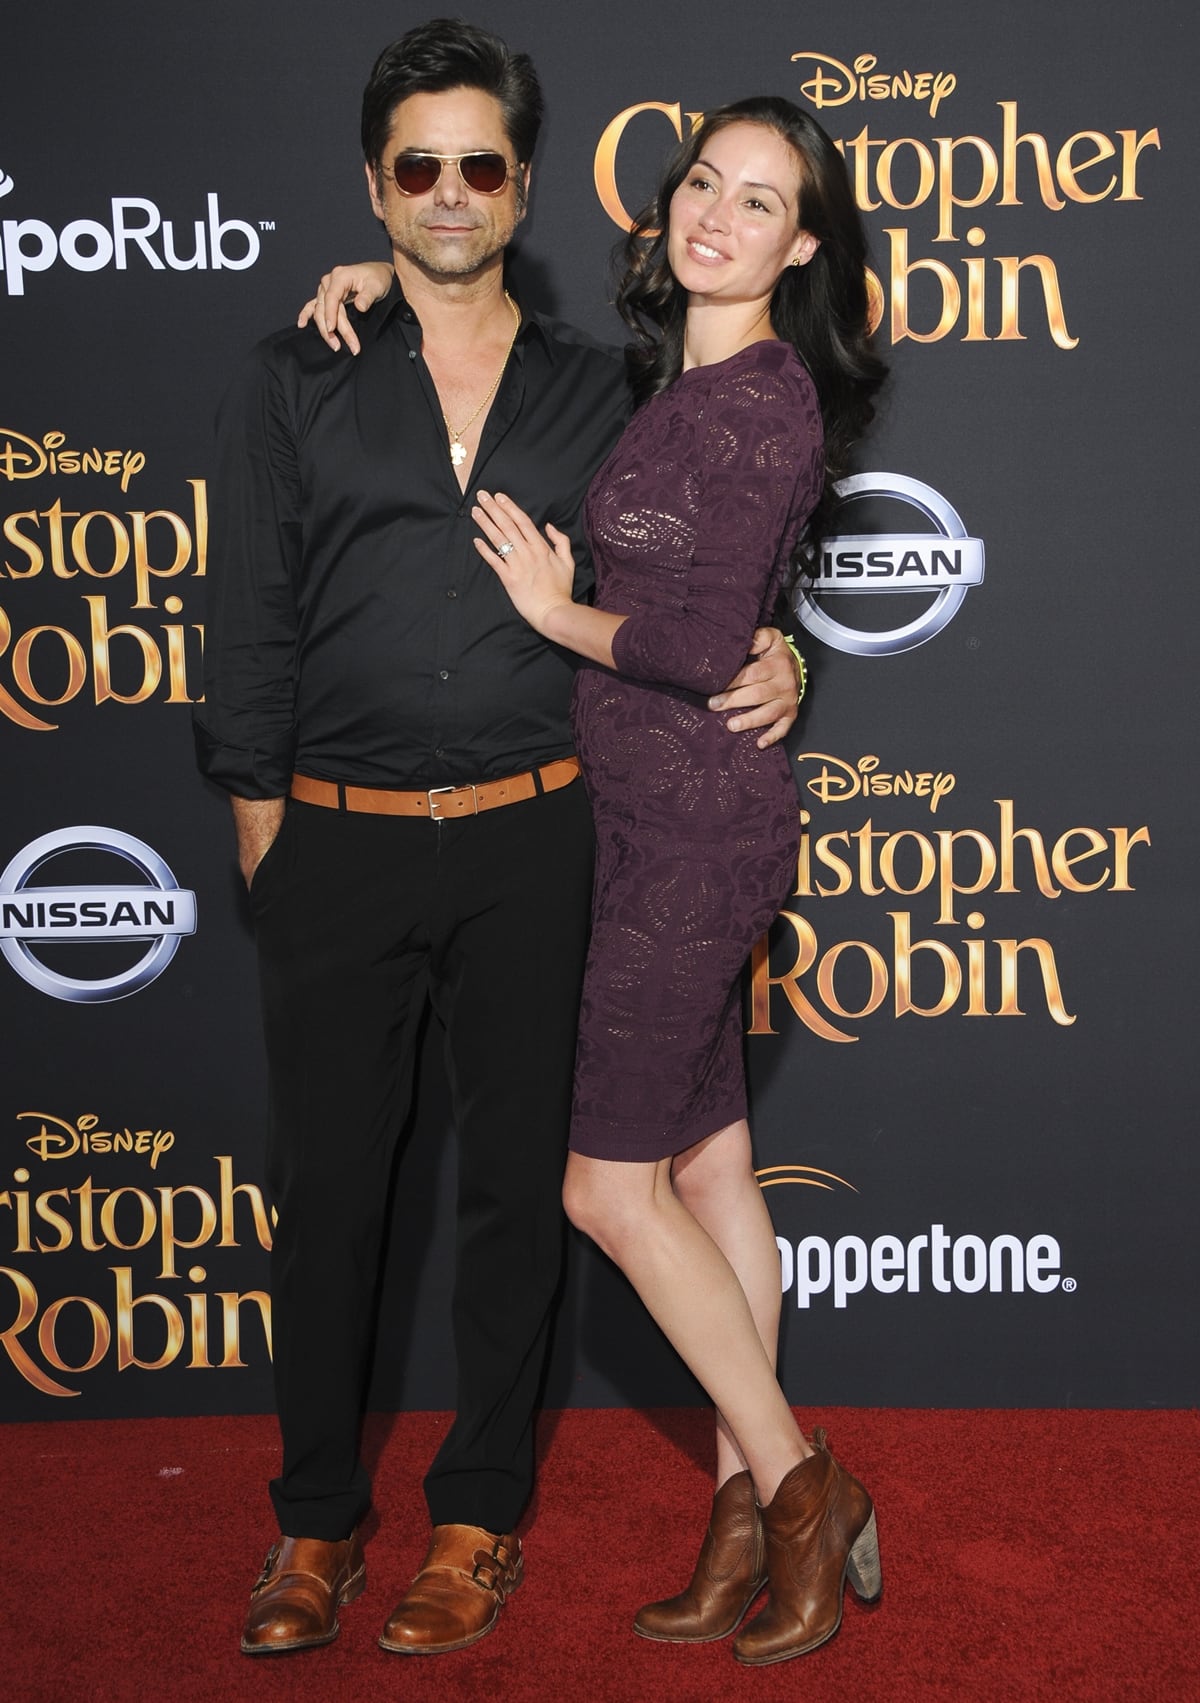 John Stamos is slightly taller and 23 years older than his wife Caitlin McHugh